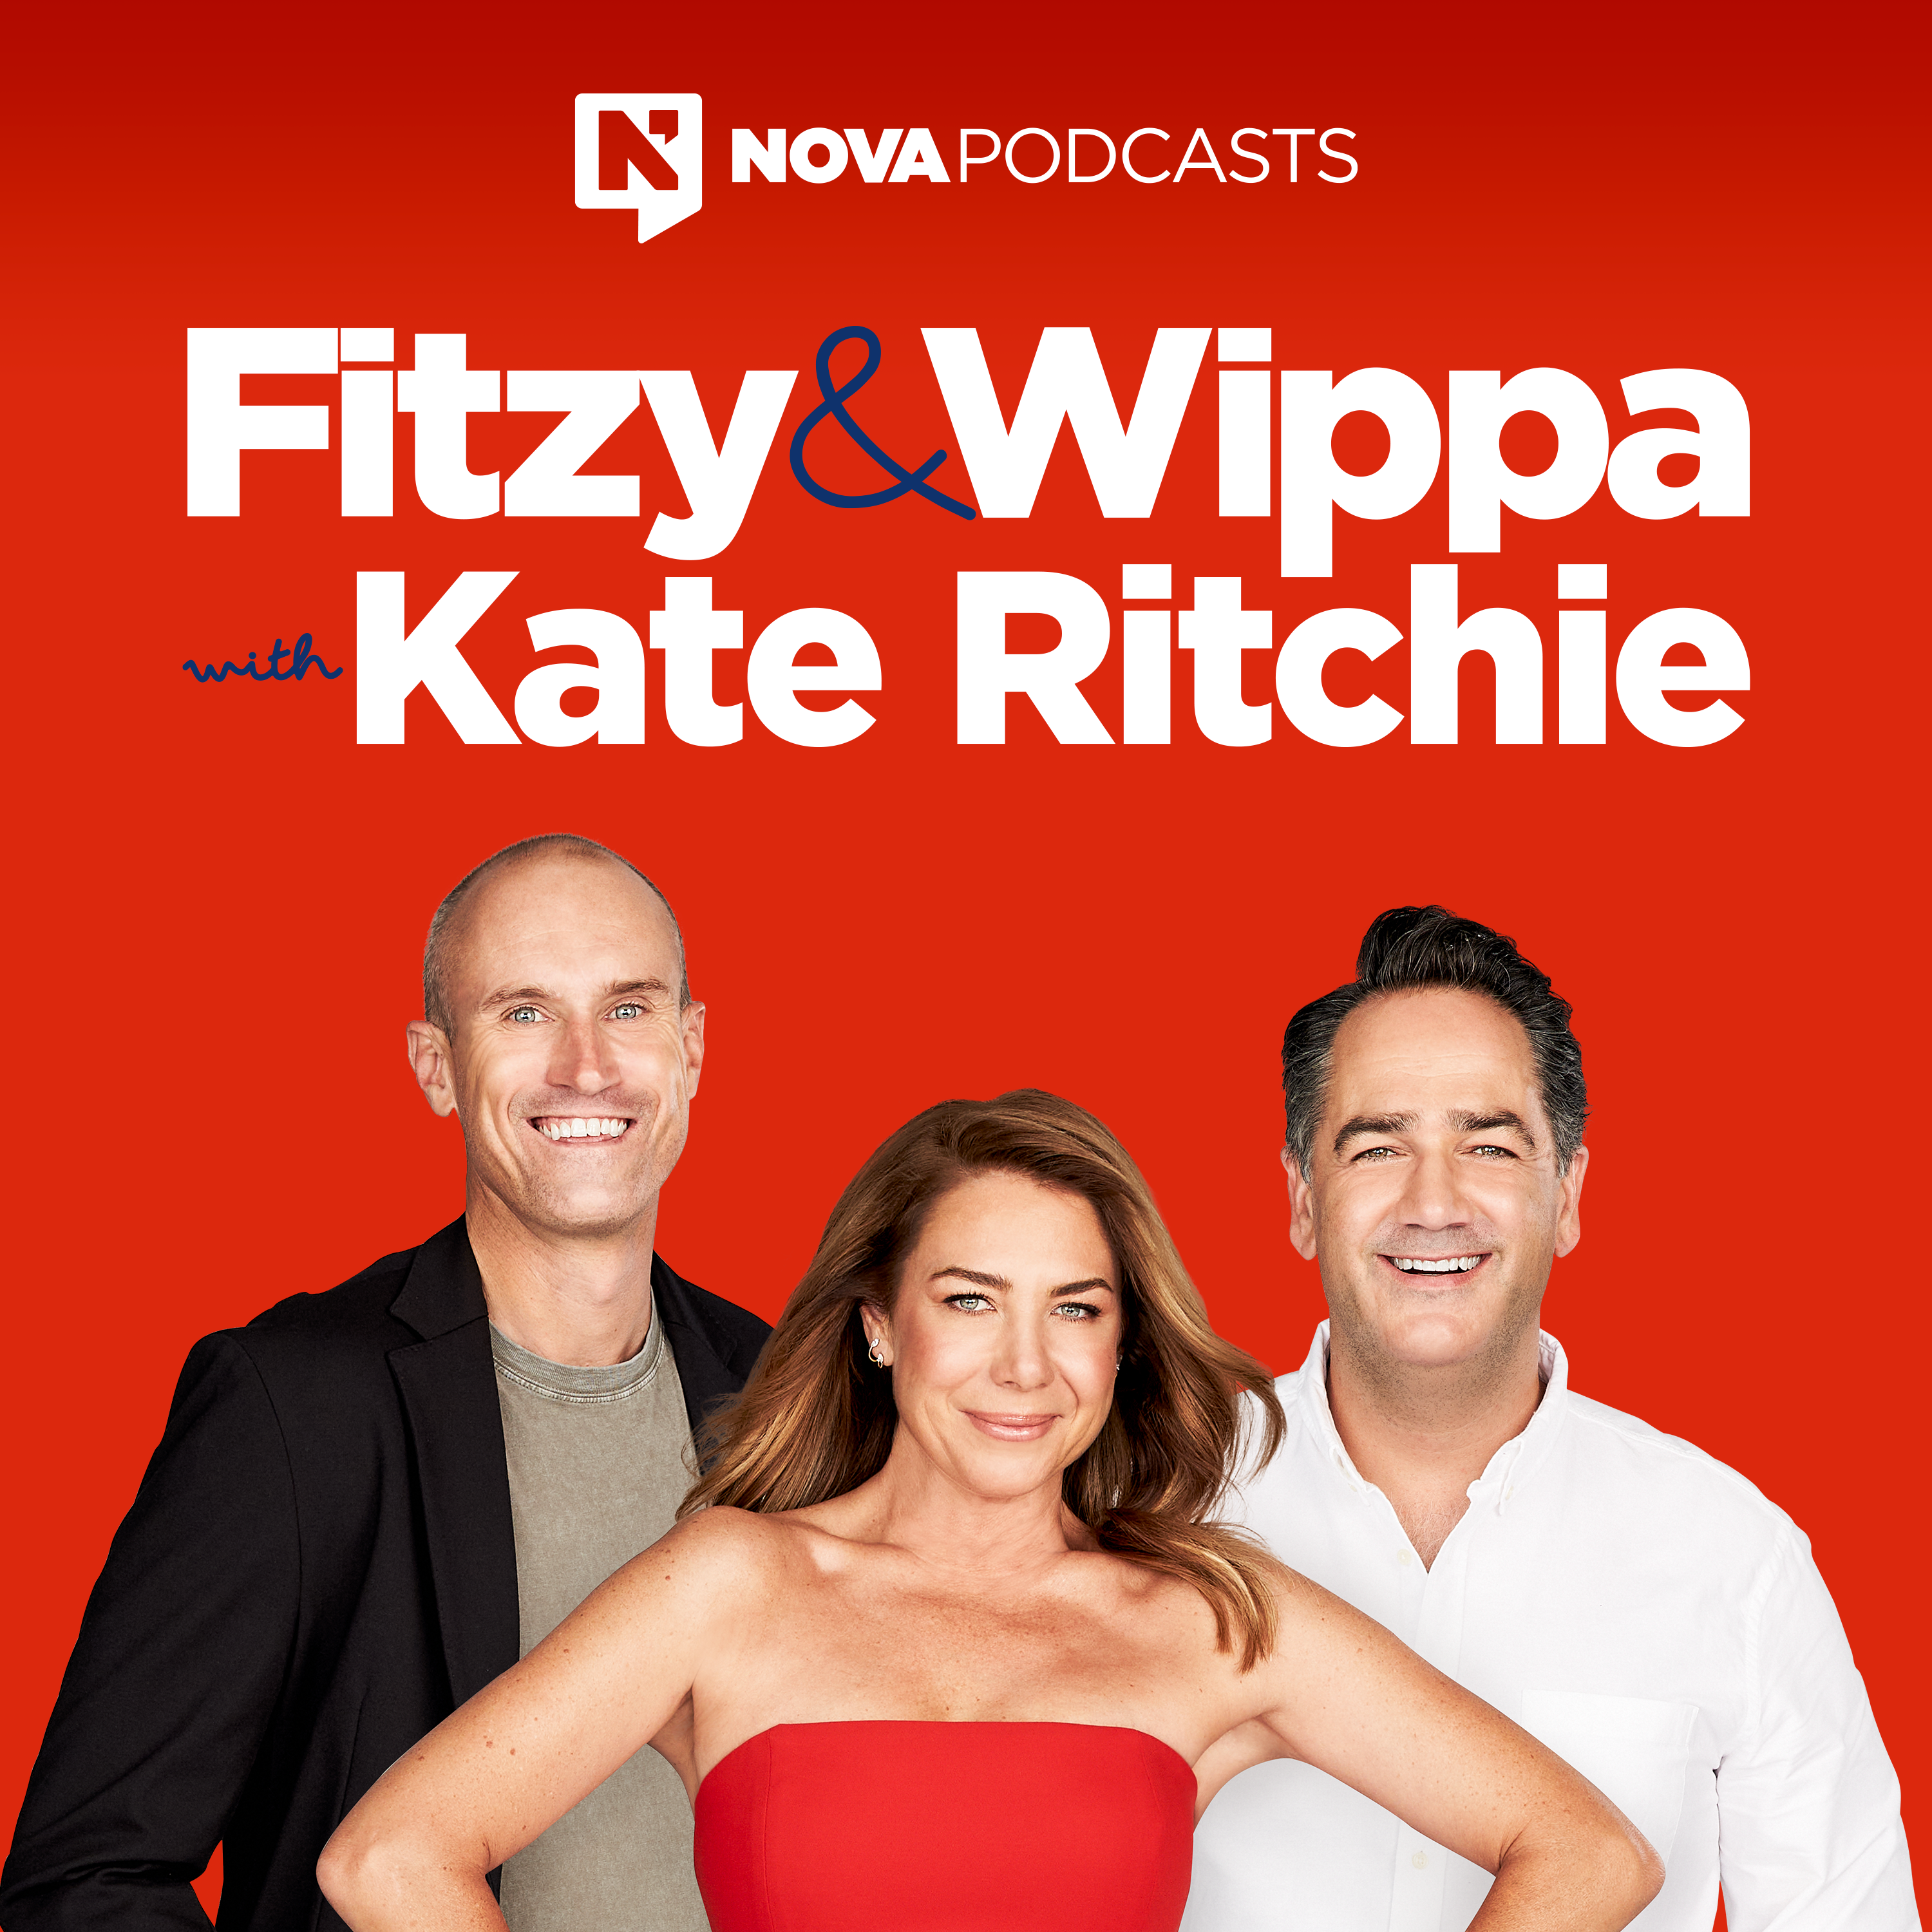 Wippa's Accidental X-Rated Trip To The IMAX